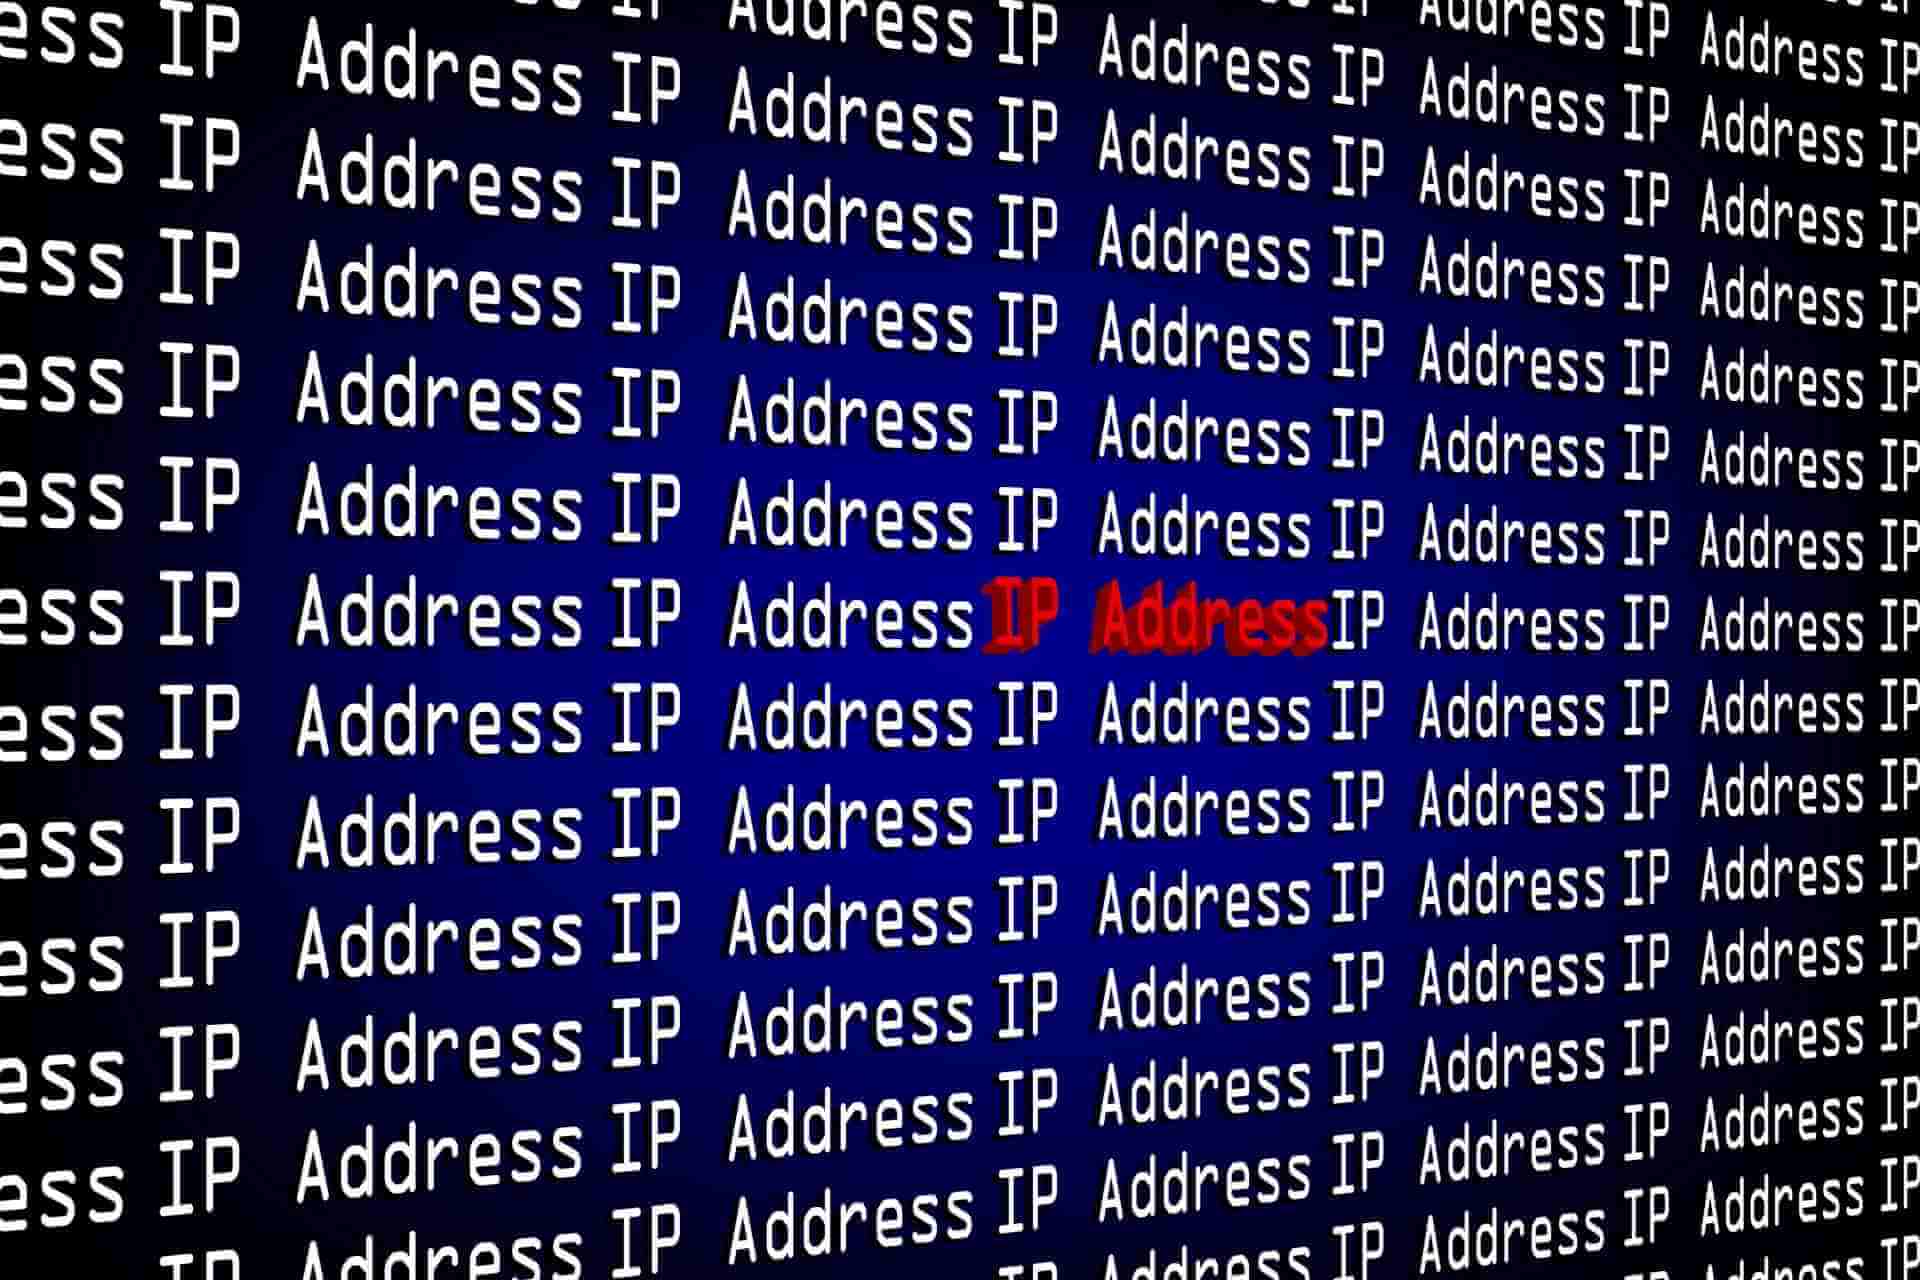 How to change your IP address3